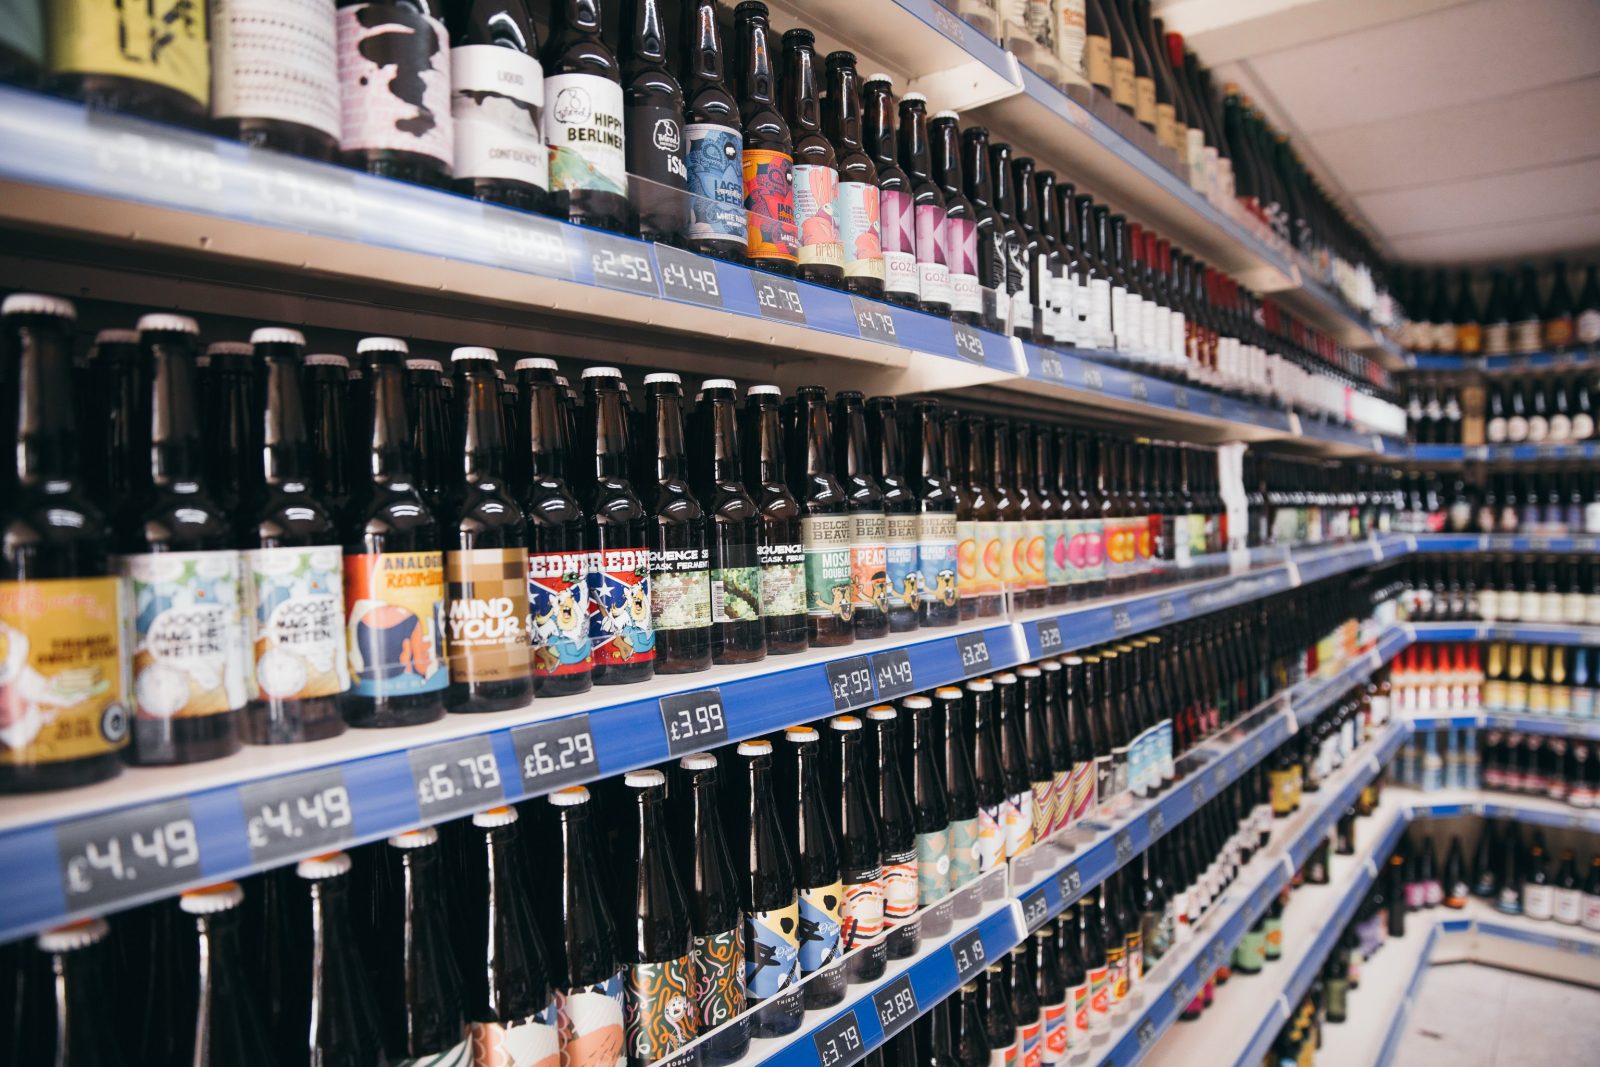 rows upon rows of beers filling the store